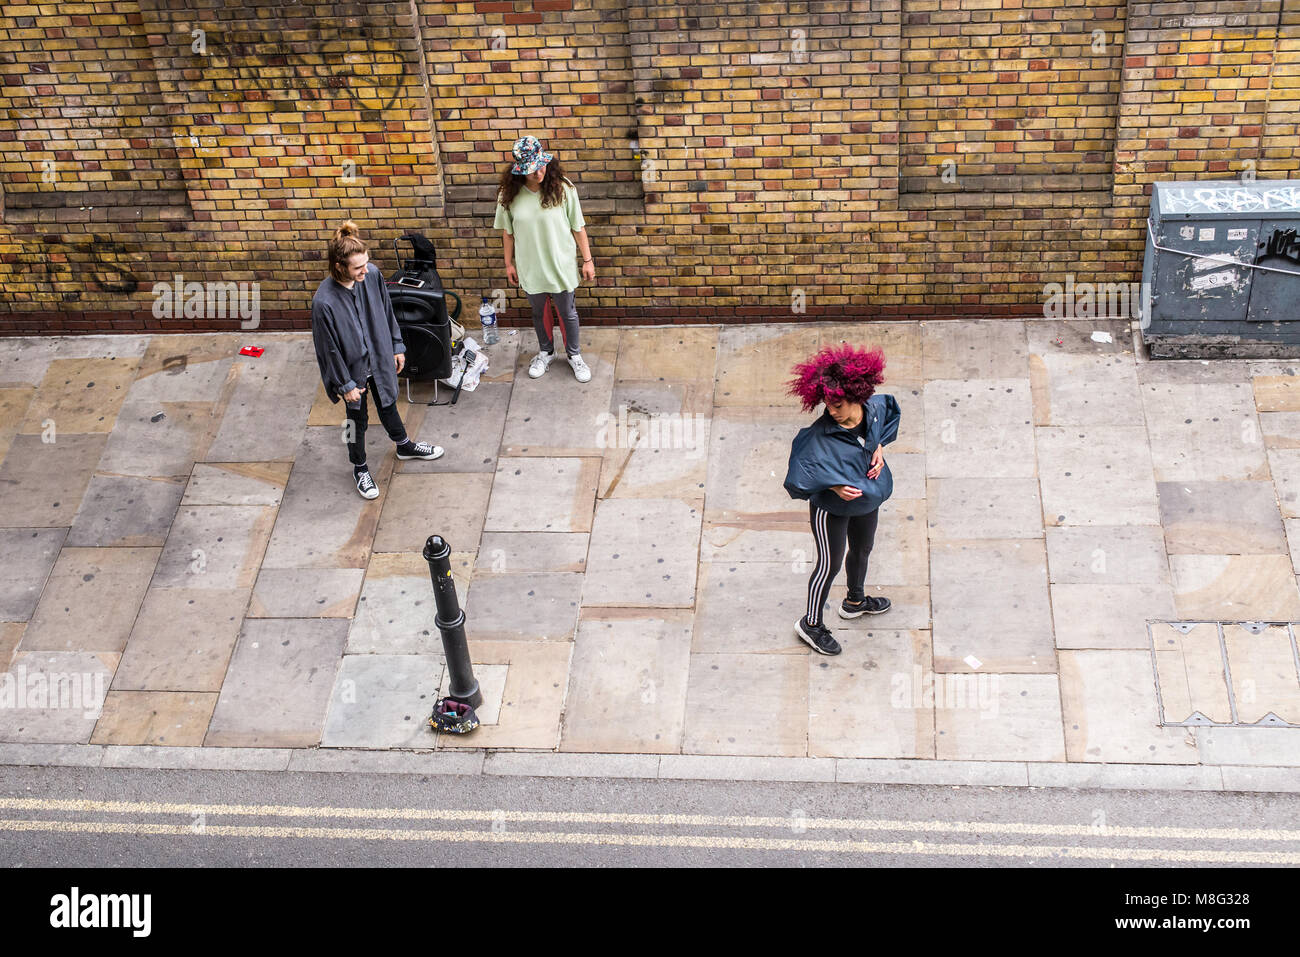 Street dance improvised performance by hip-hop acrobatic dancers outside The Old Truman Brewery, Ely's Yard, Shoreditch, London, UK Stock Photo